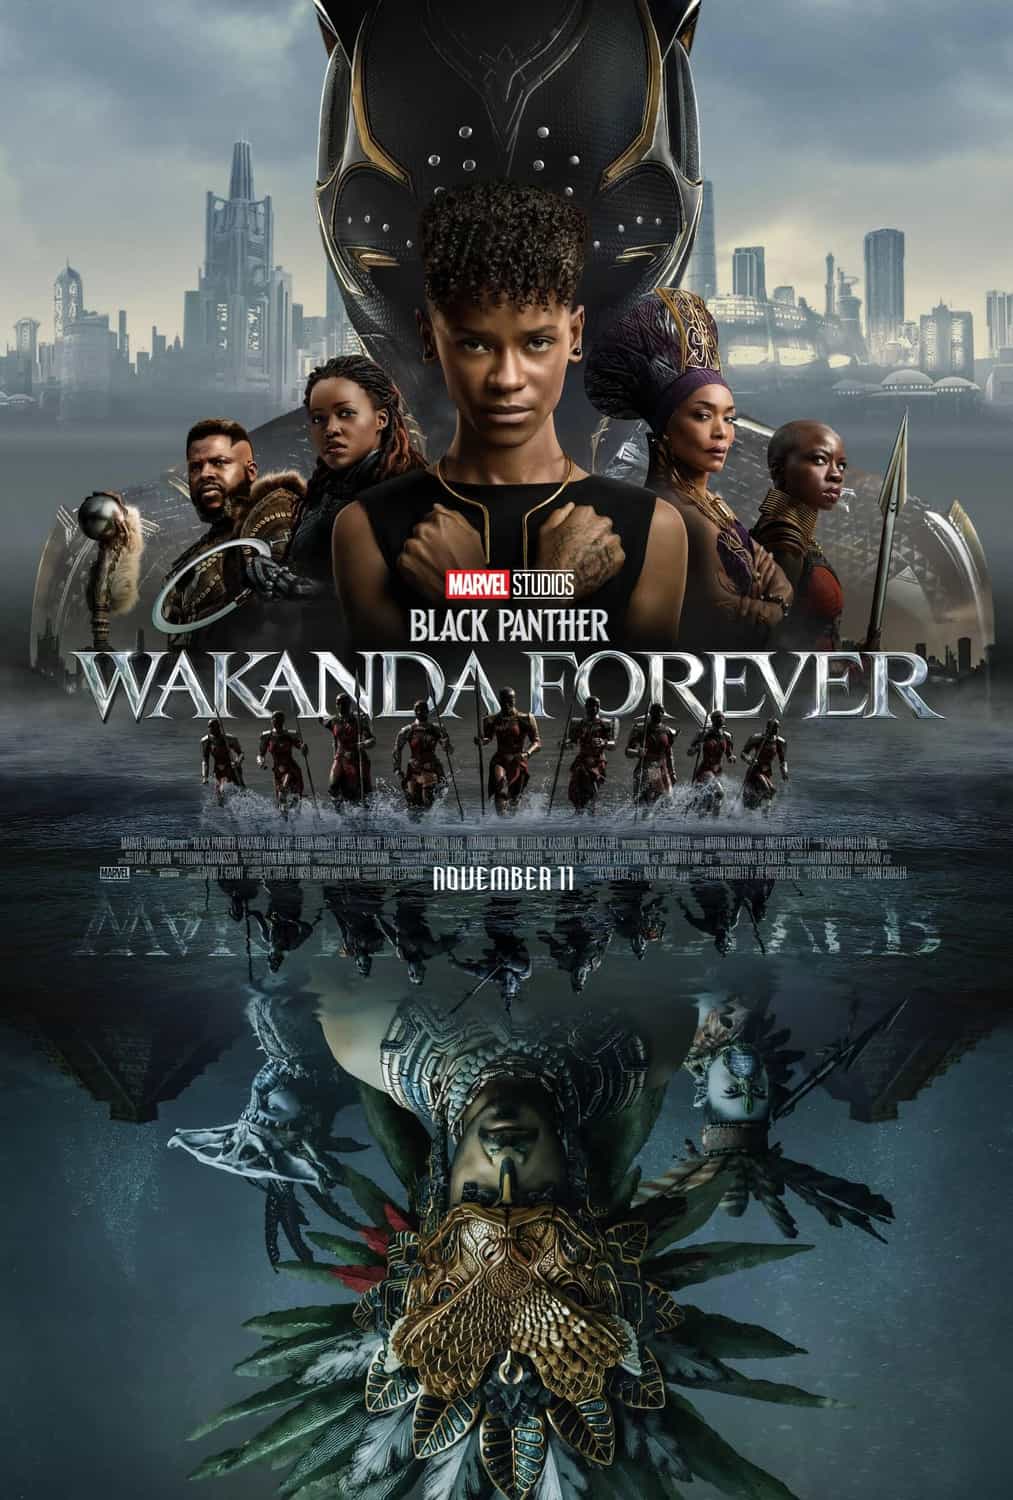 This weeks UK new movie preview 11th November 2022 - Black Panther: Wakanda Forever and Slumberland - #blackpantherwakandaforever #slumberland